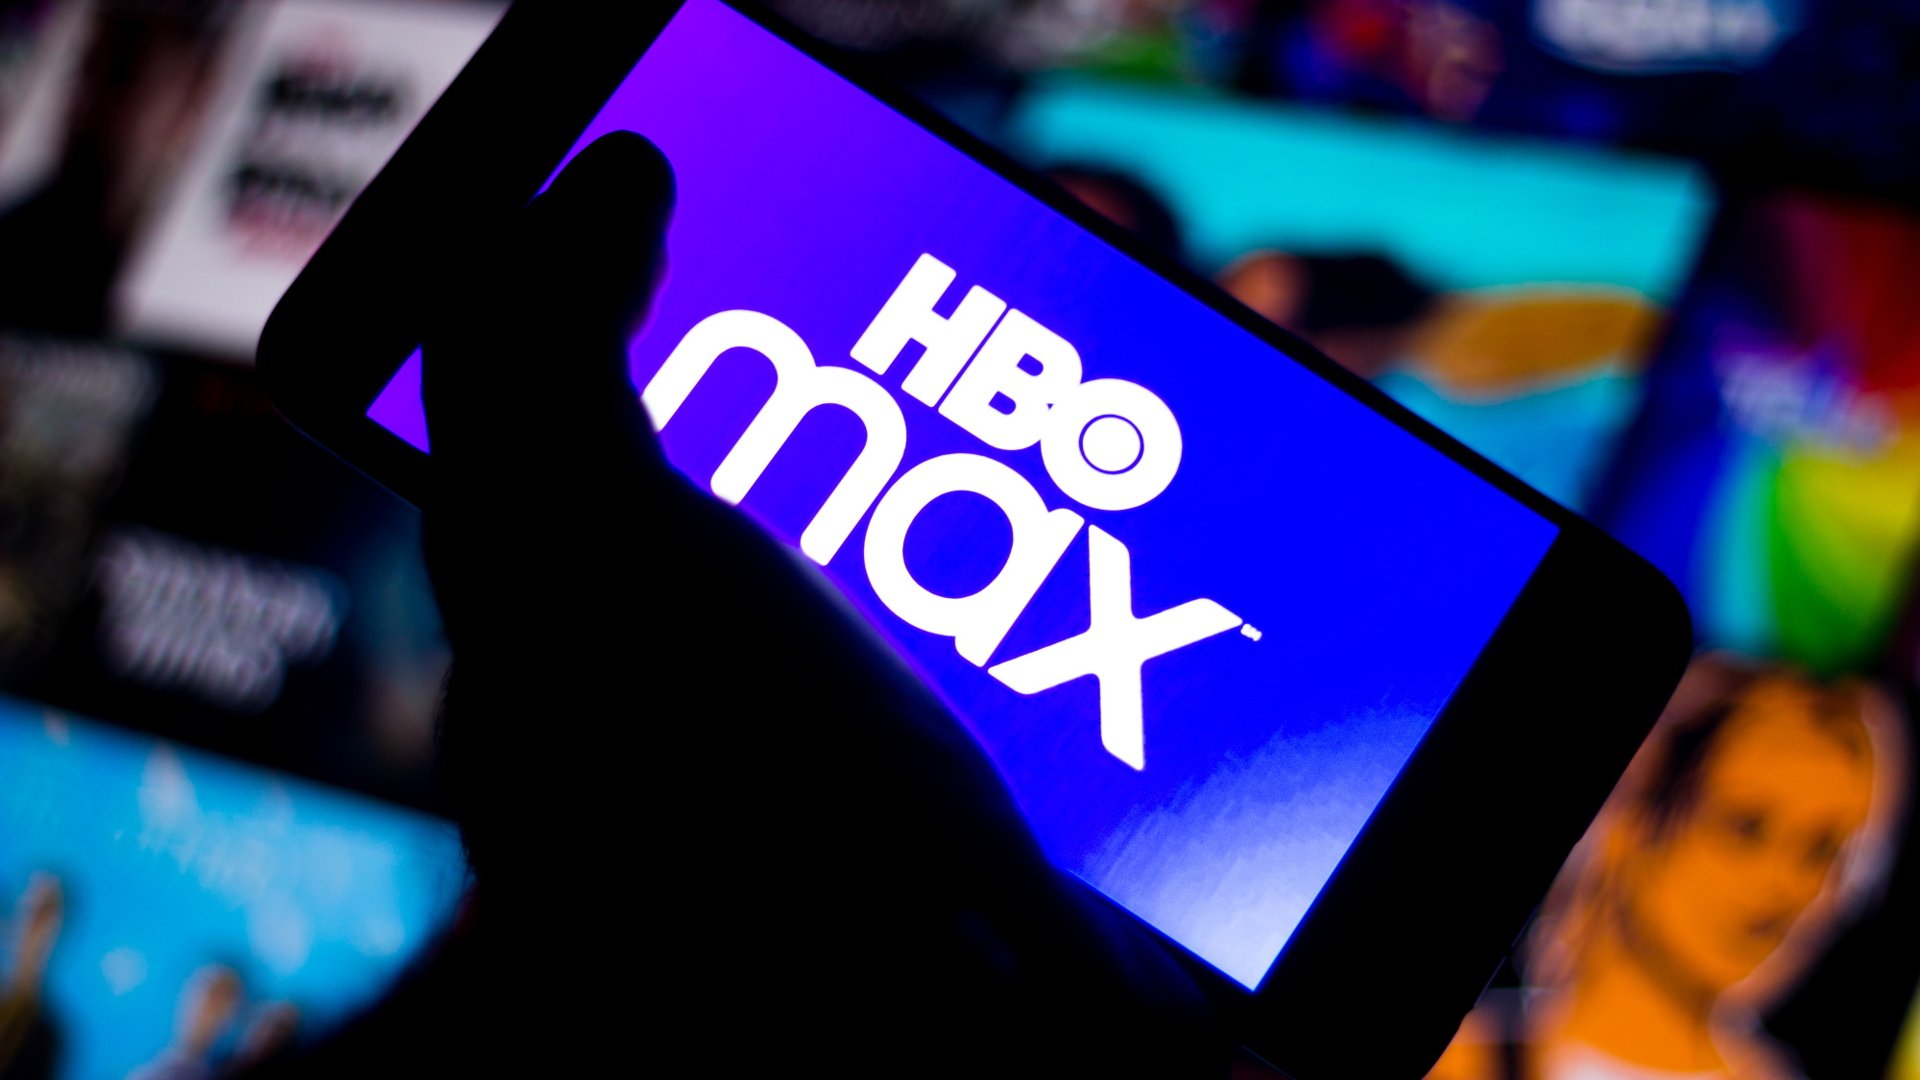 Max HBO